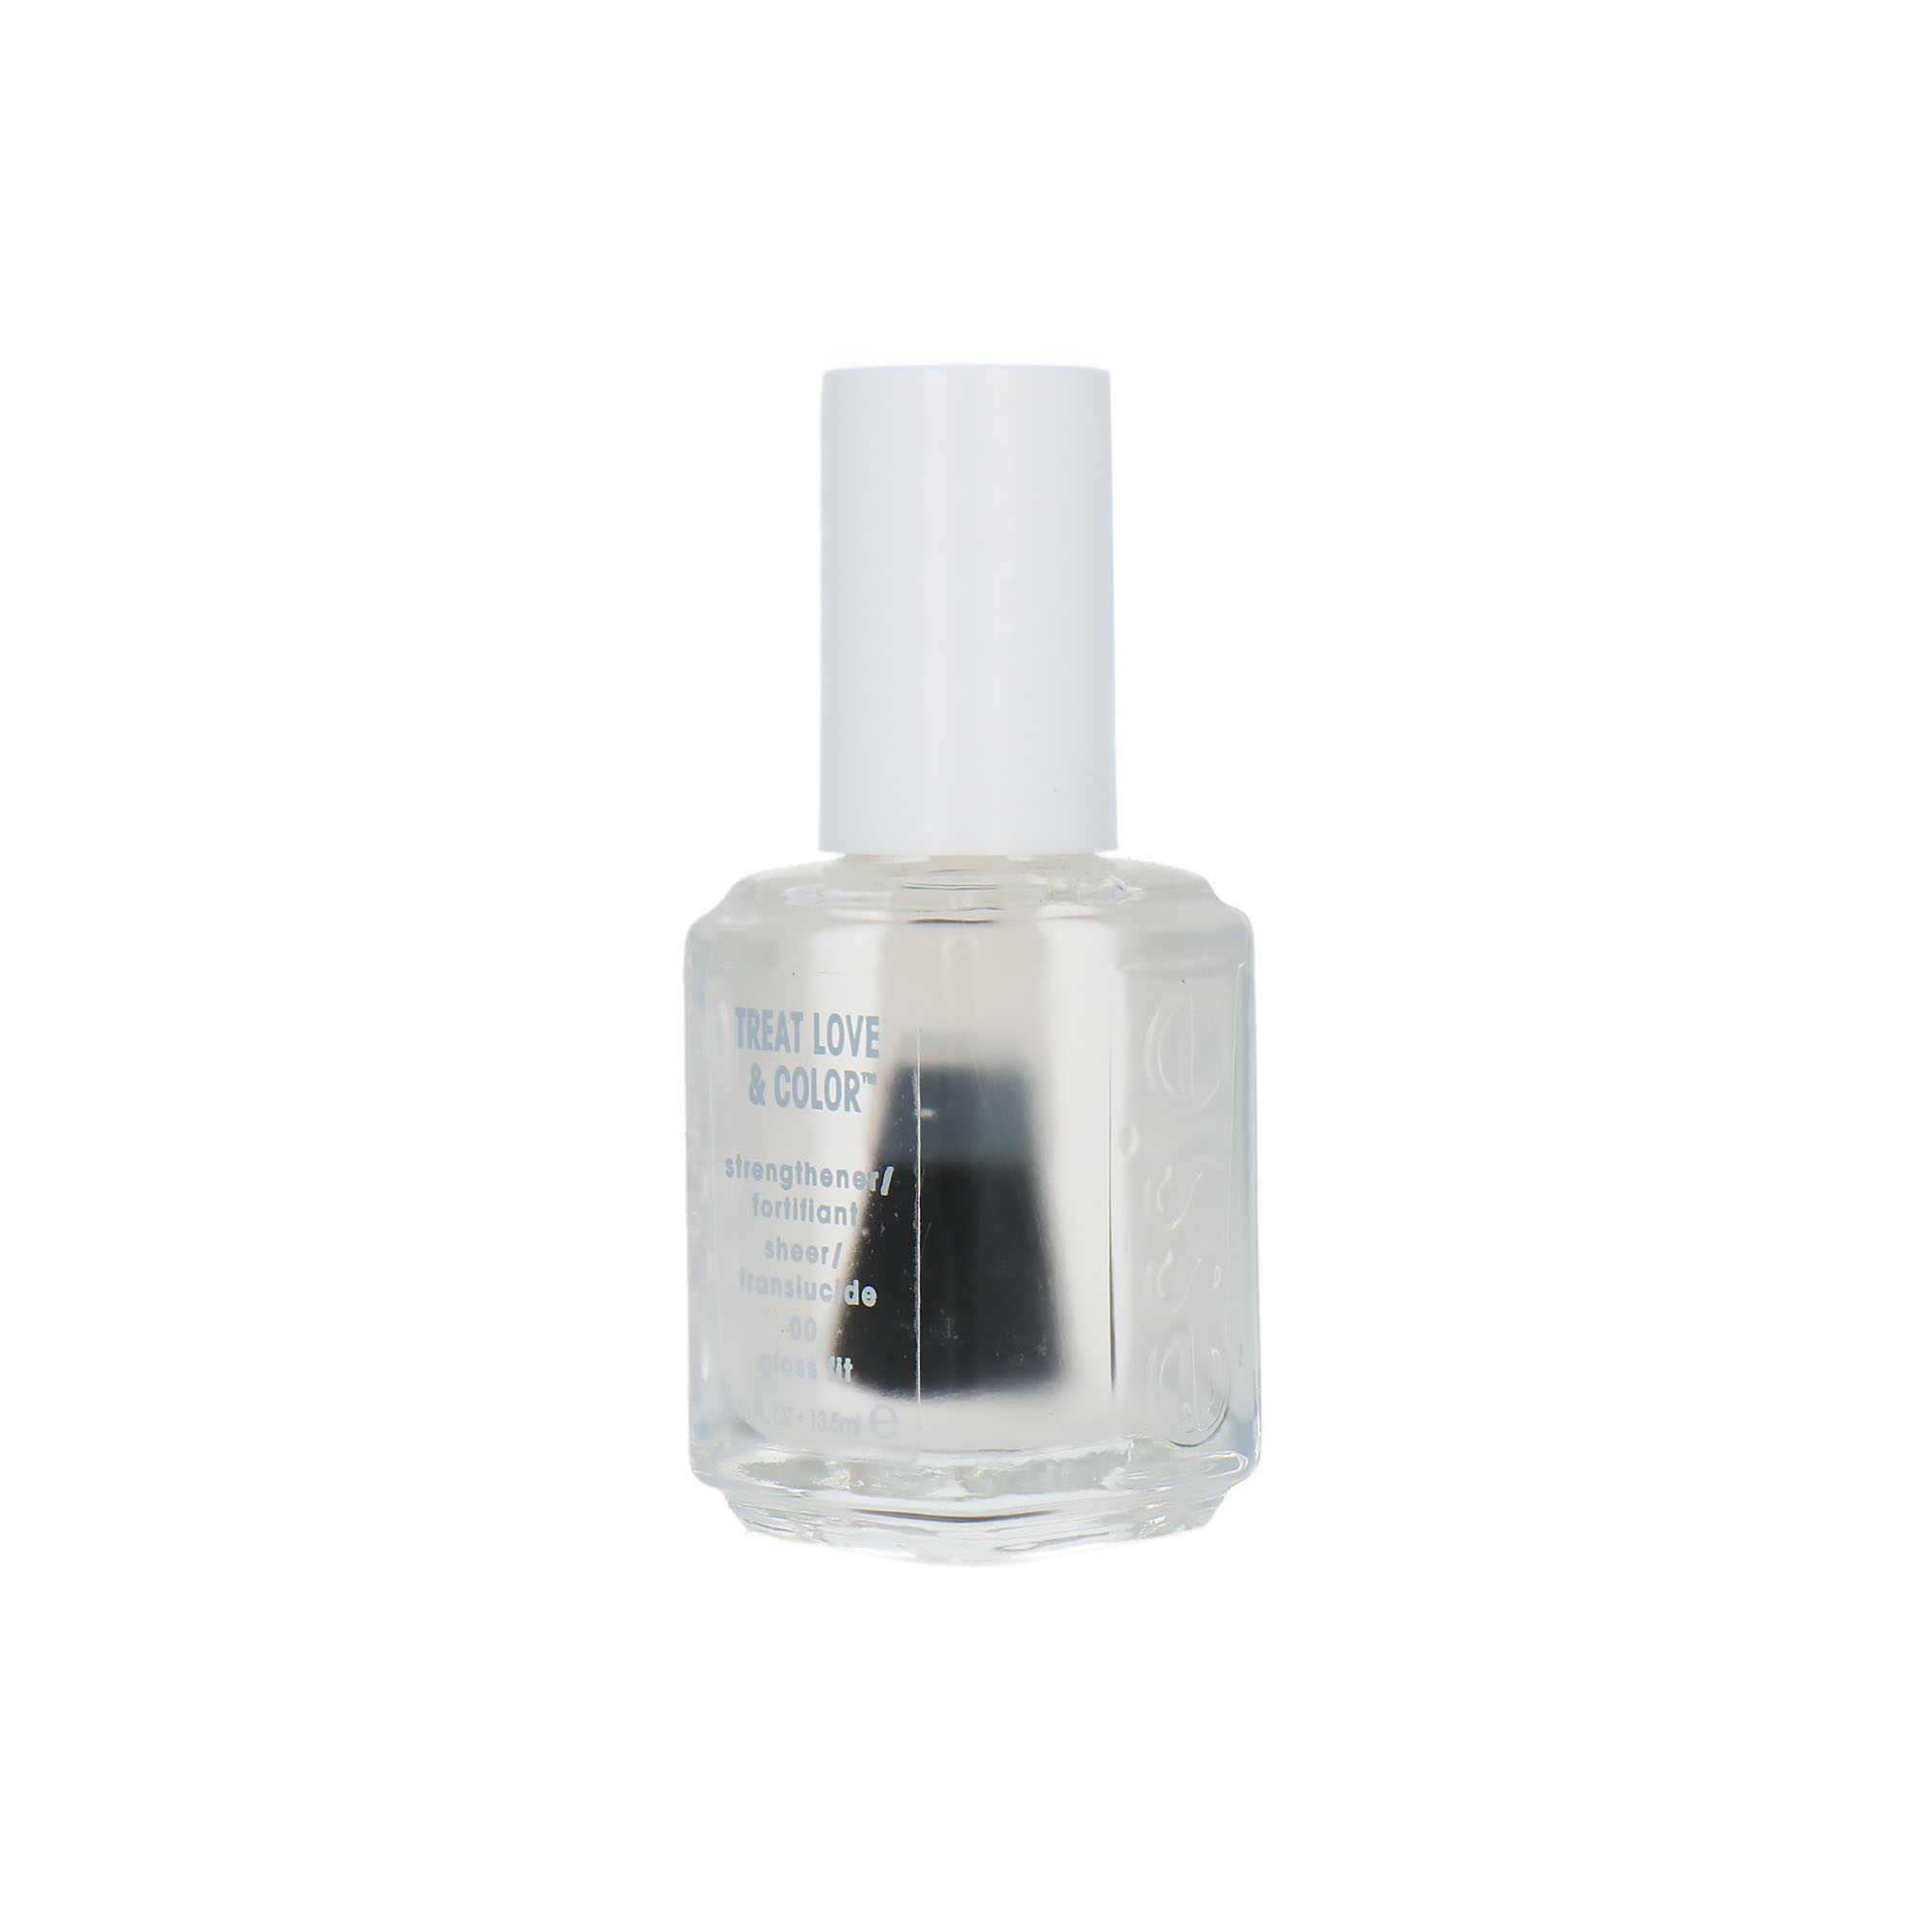 Love Color Treat Essie Blisso Nagellack - & Fit 00 - Kaufen Strengthener Gloss